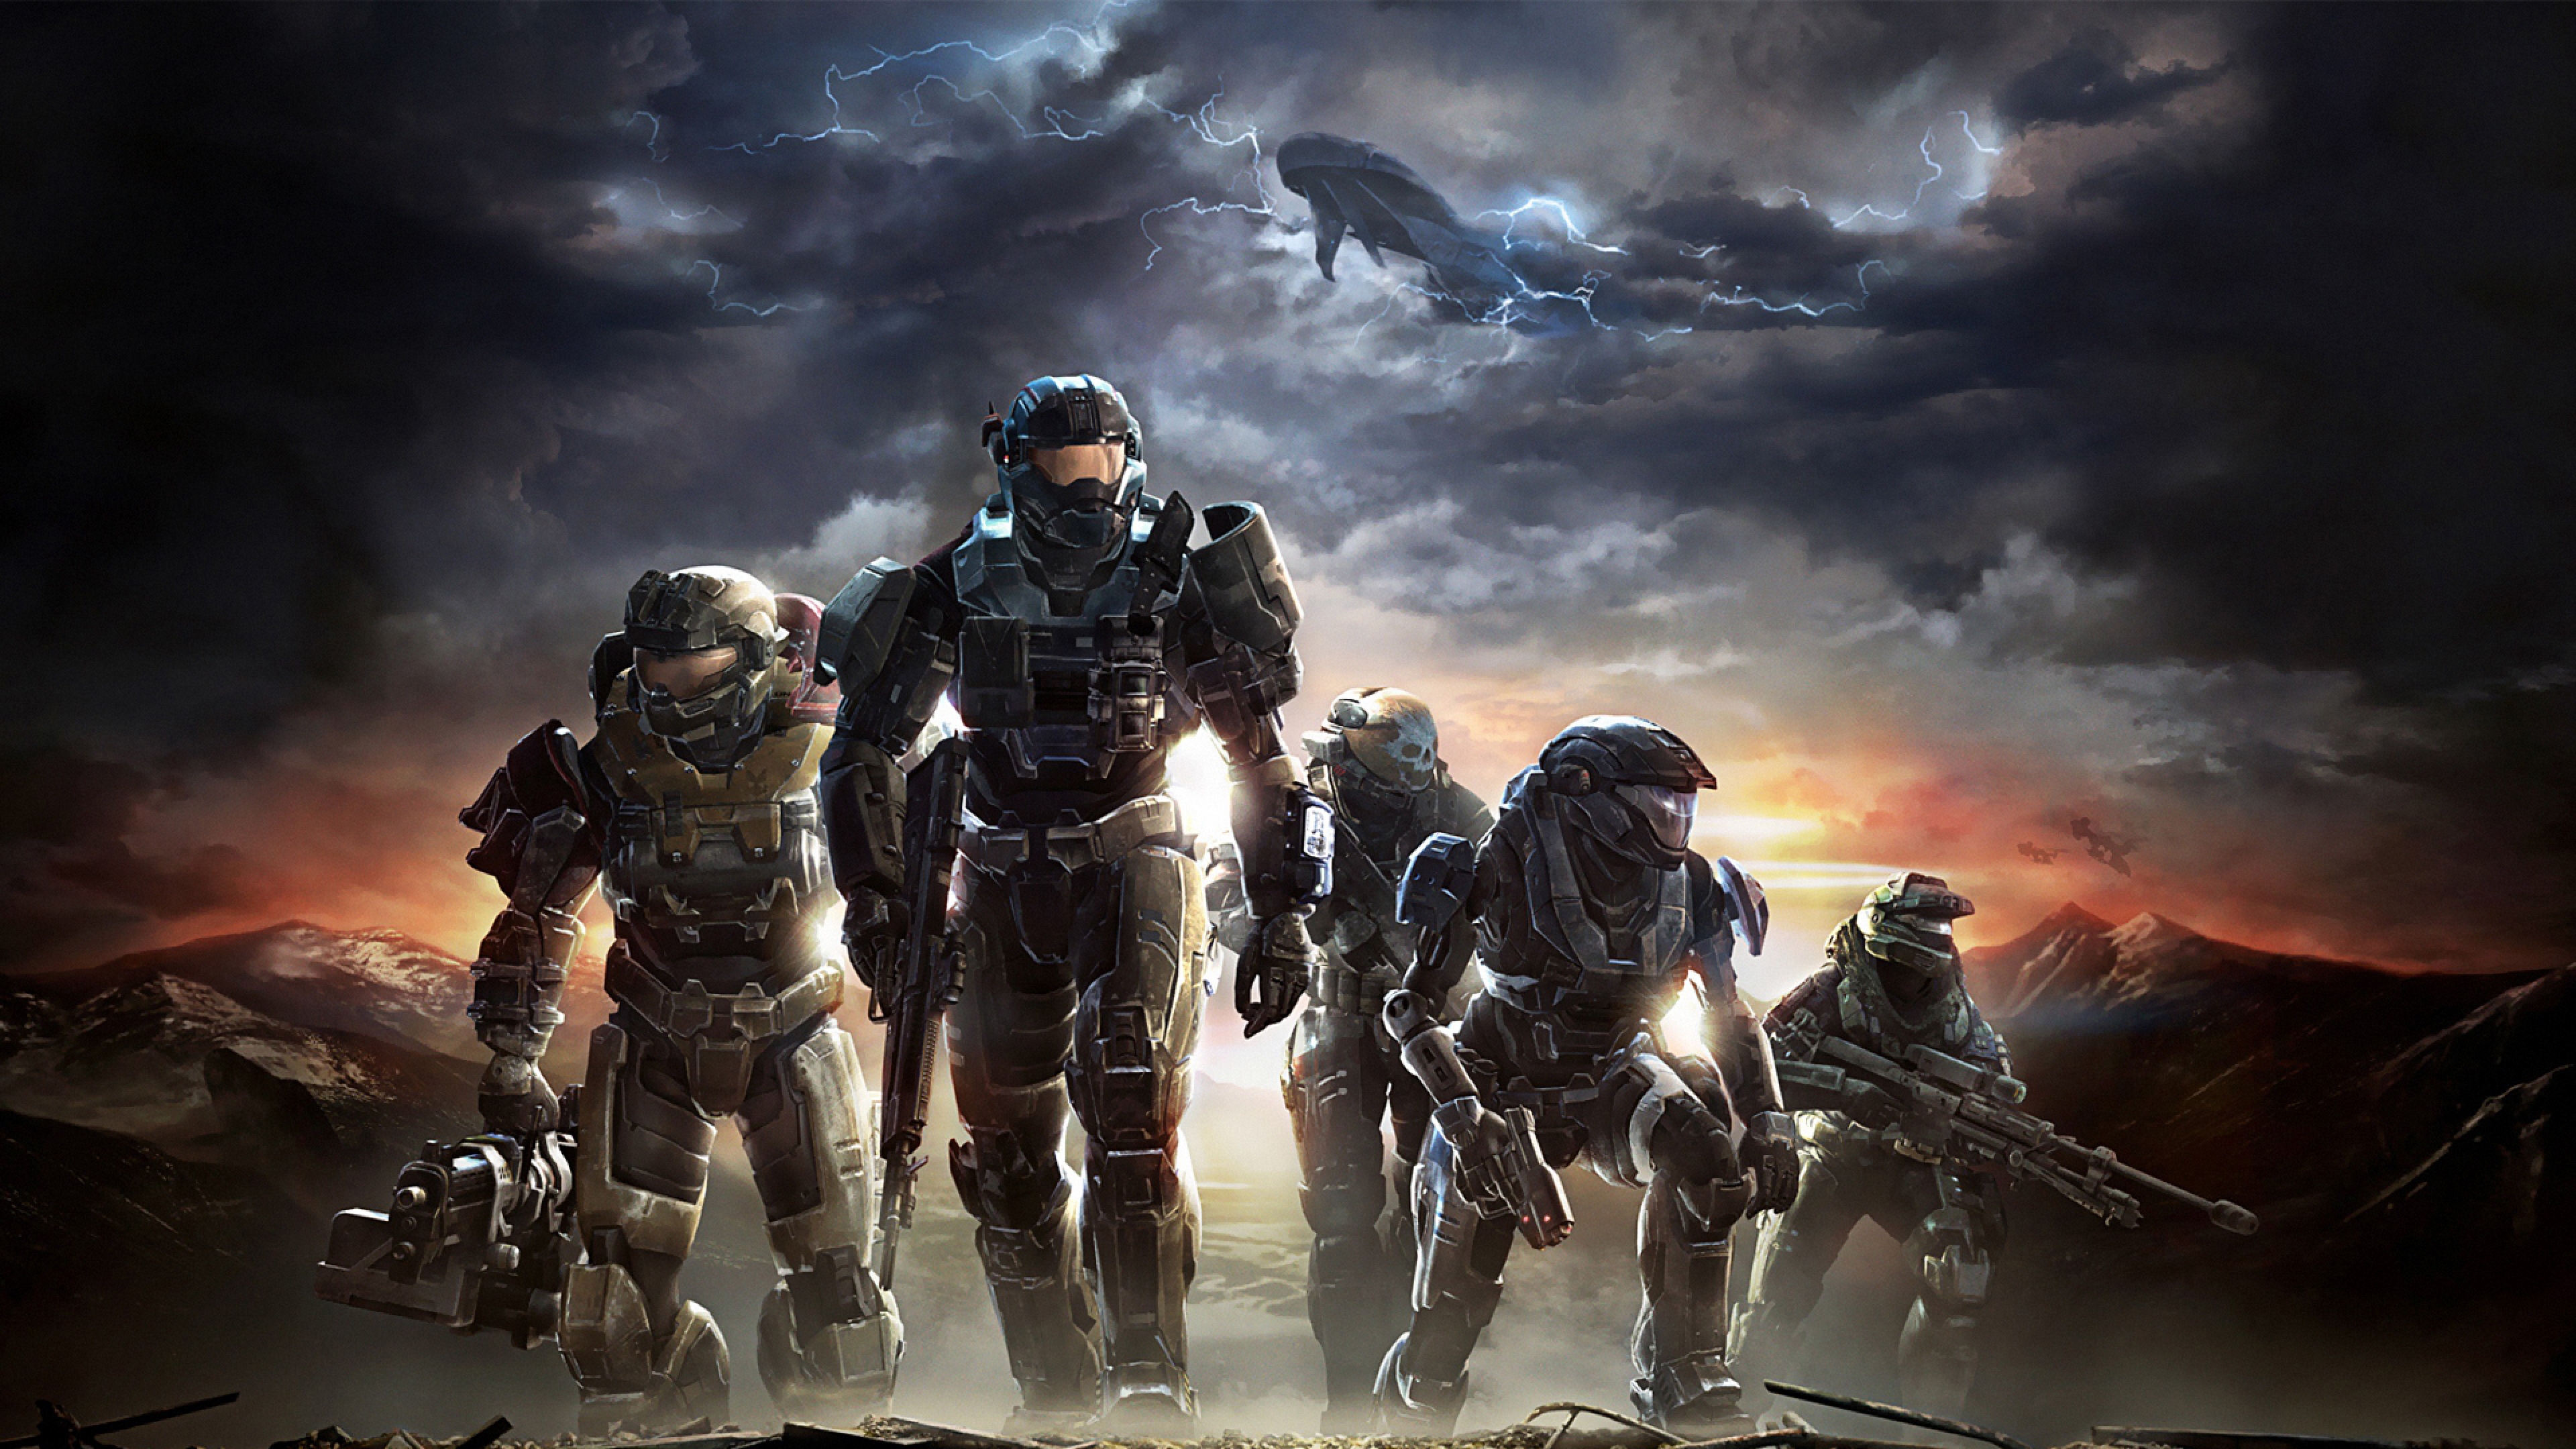 Wallpaper Halo Soldiers Sky Clouds Mountains 4k